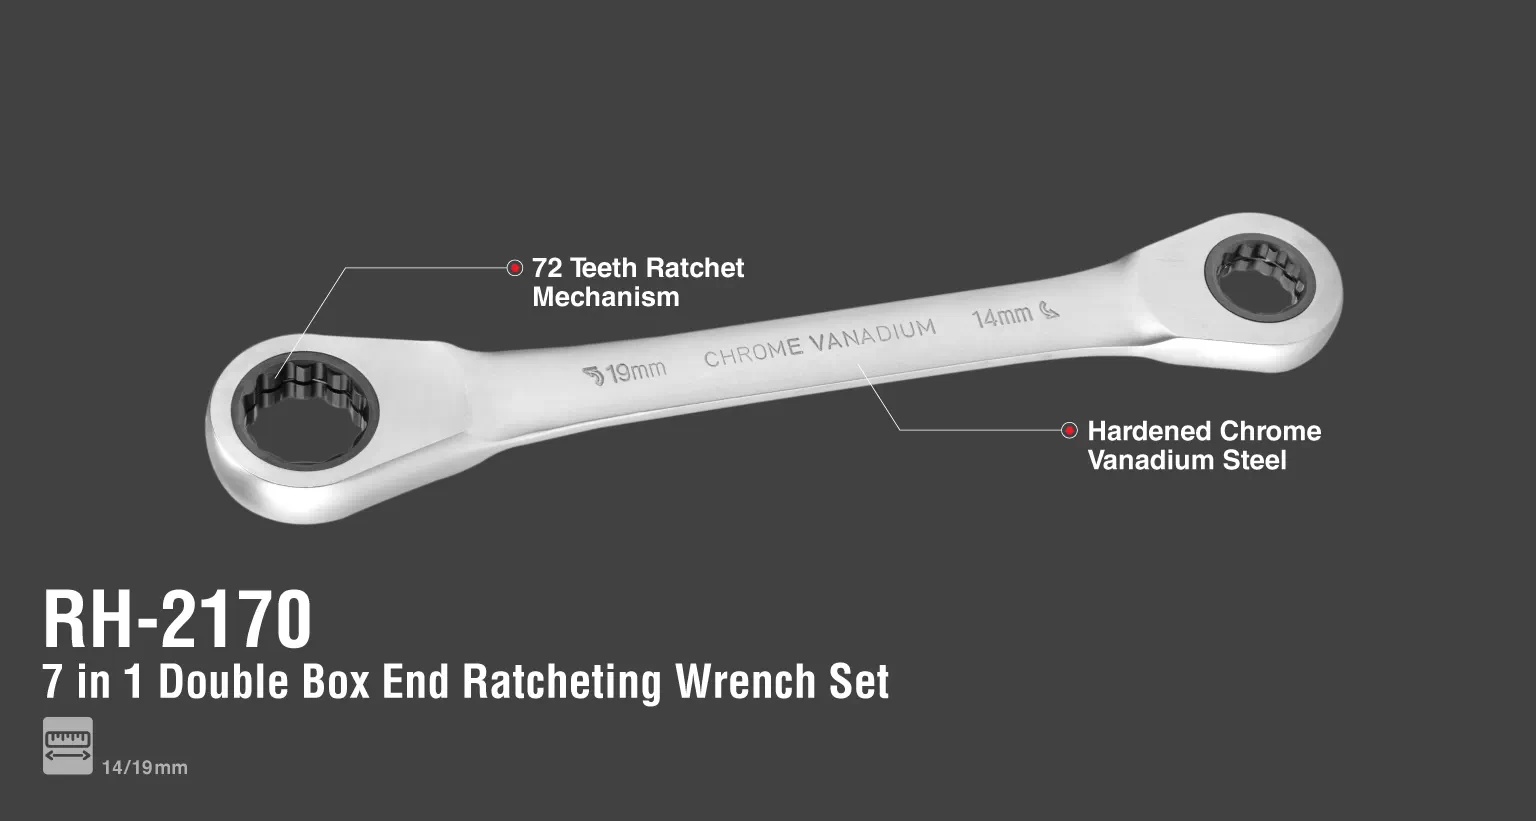 7 in 1 double box end ratcheting wrench set_details